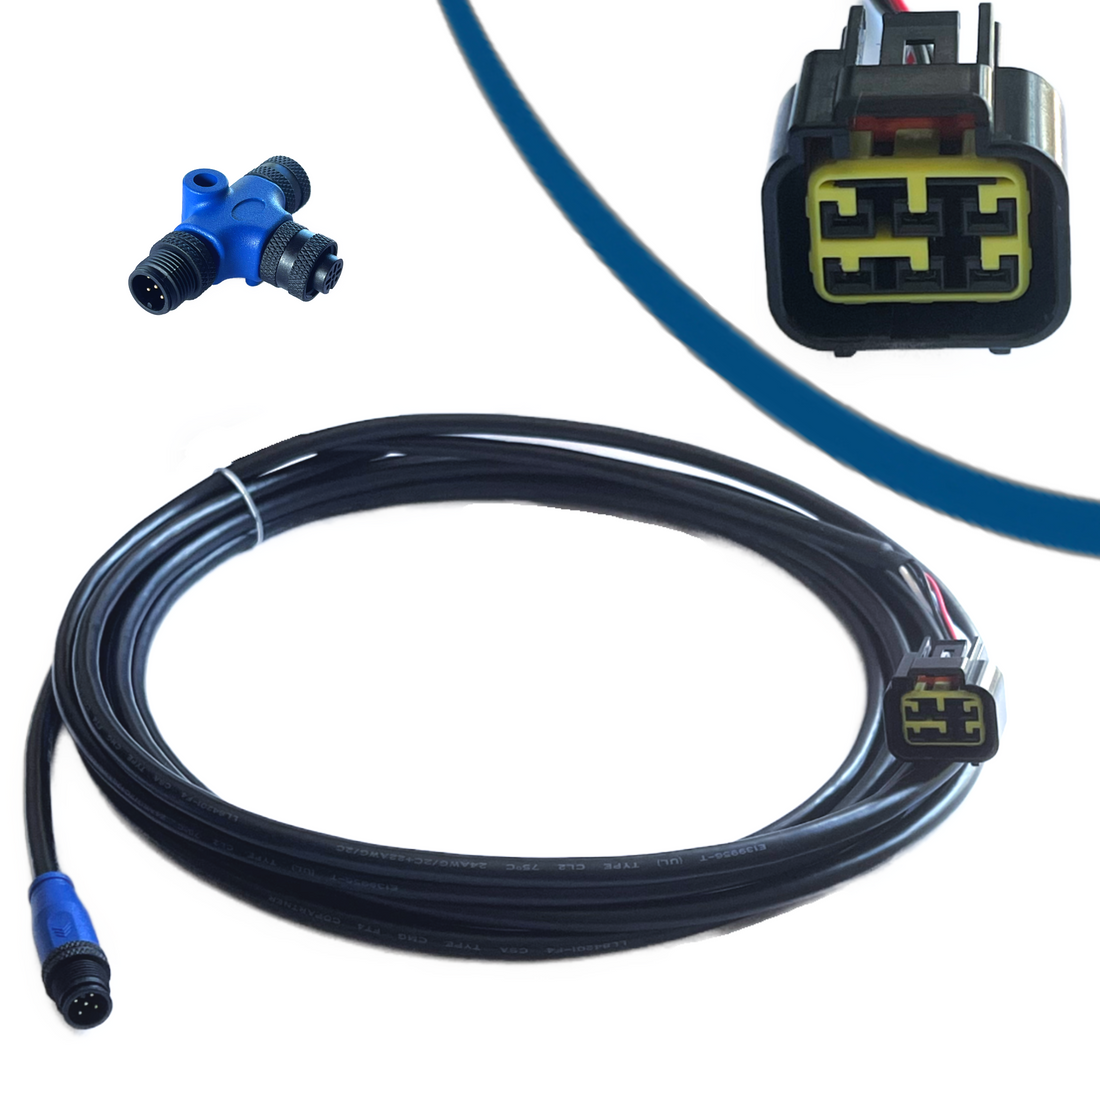 NMEA 2000 Starter Kit Set + Engine Cable for Honda Outboards